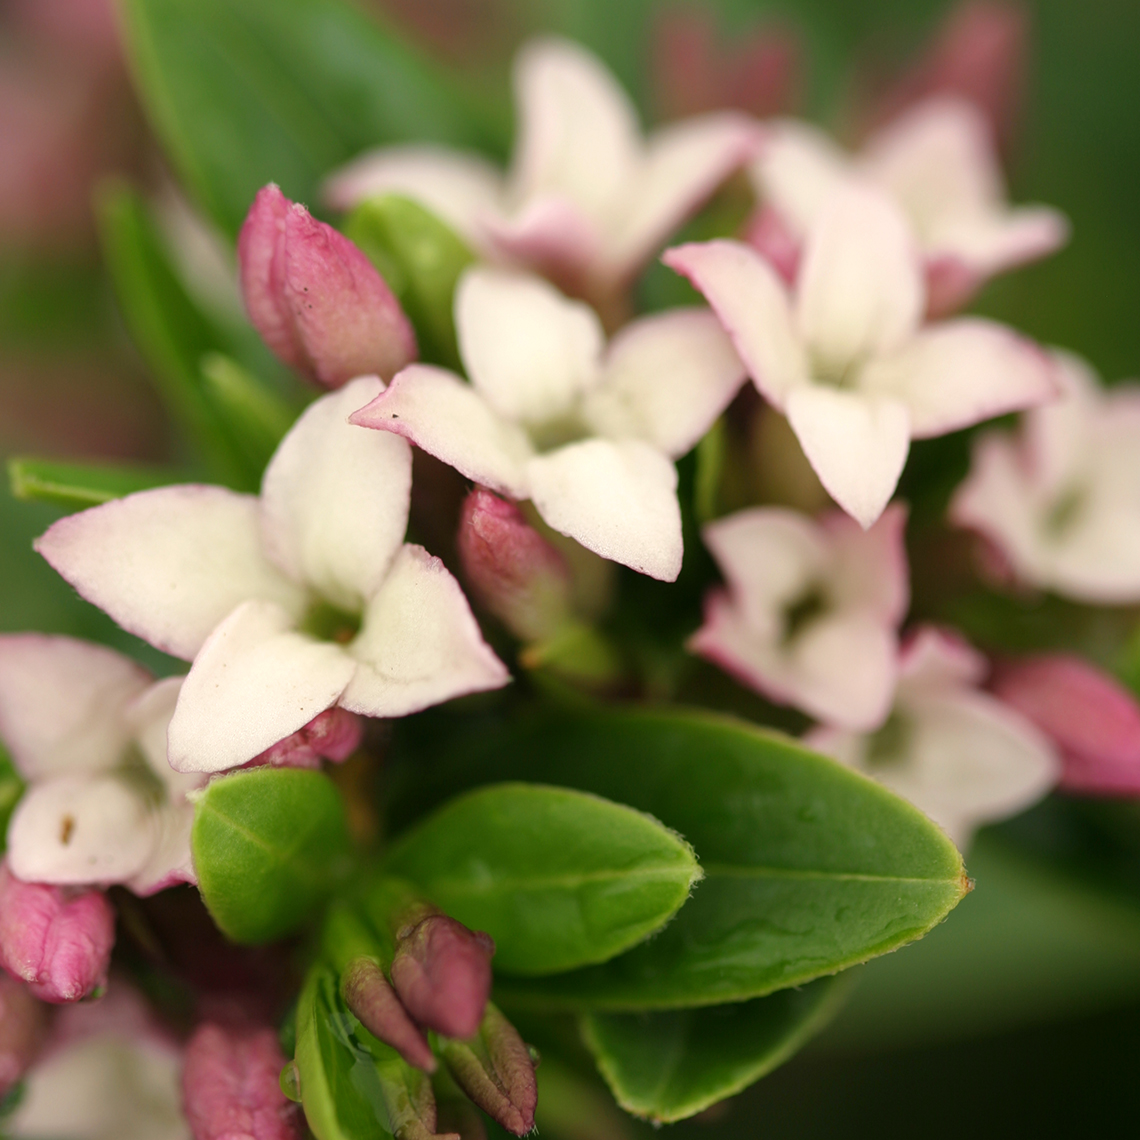 Close up of tanguitica Daphne pink and white blooms